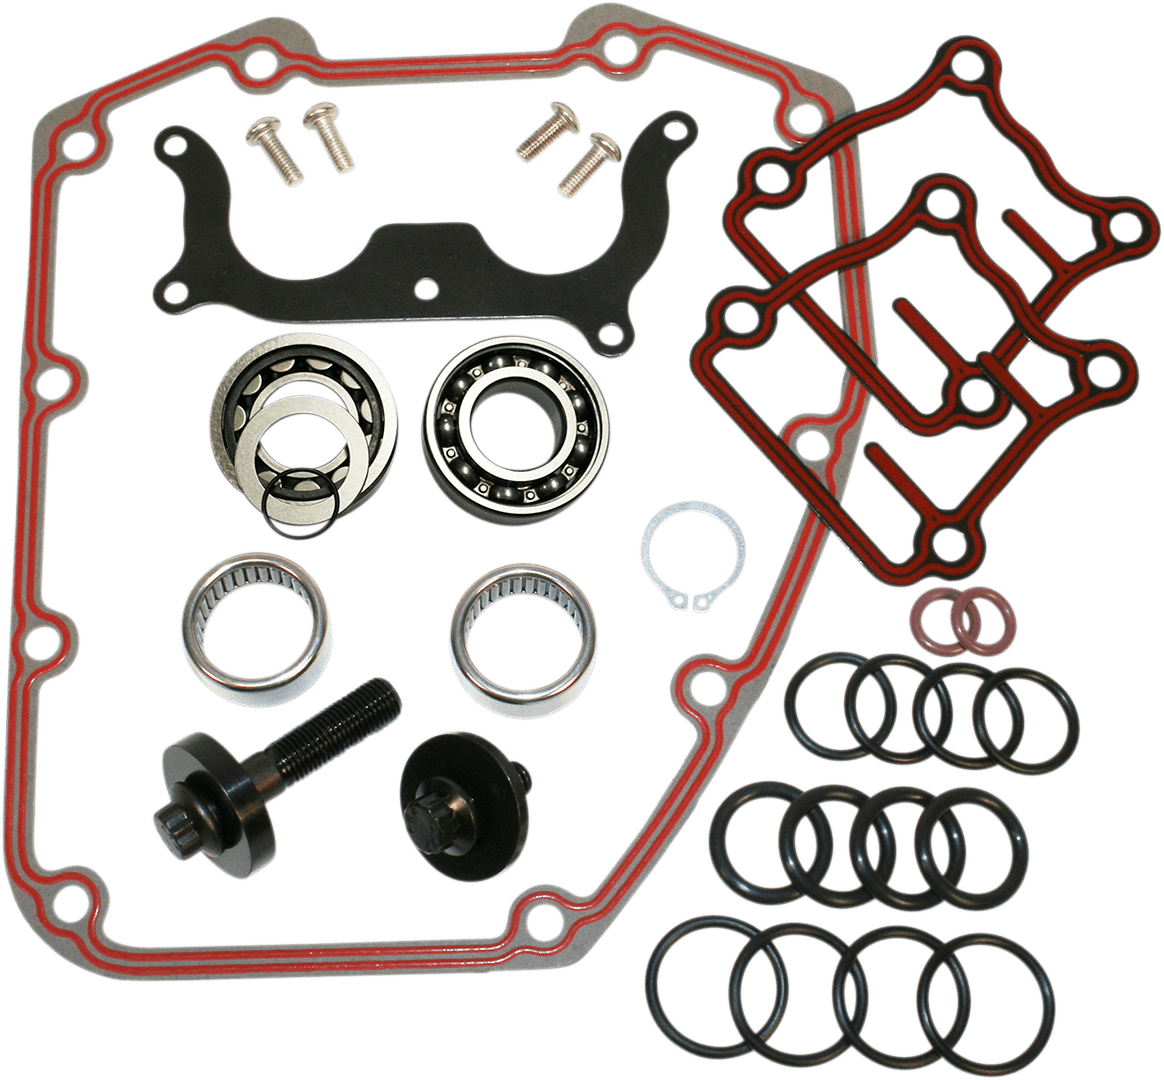 FEULING-Camshaft Installation Kit / '07-'17 Twin Cam-Cam Installation-MetalCore Harley Supply